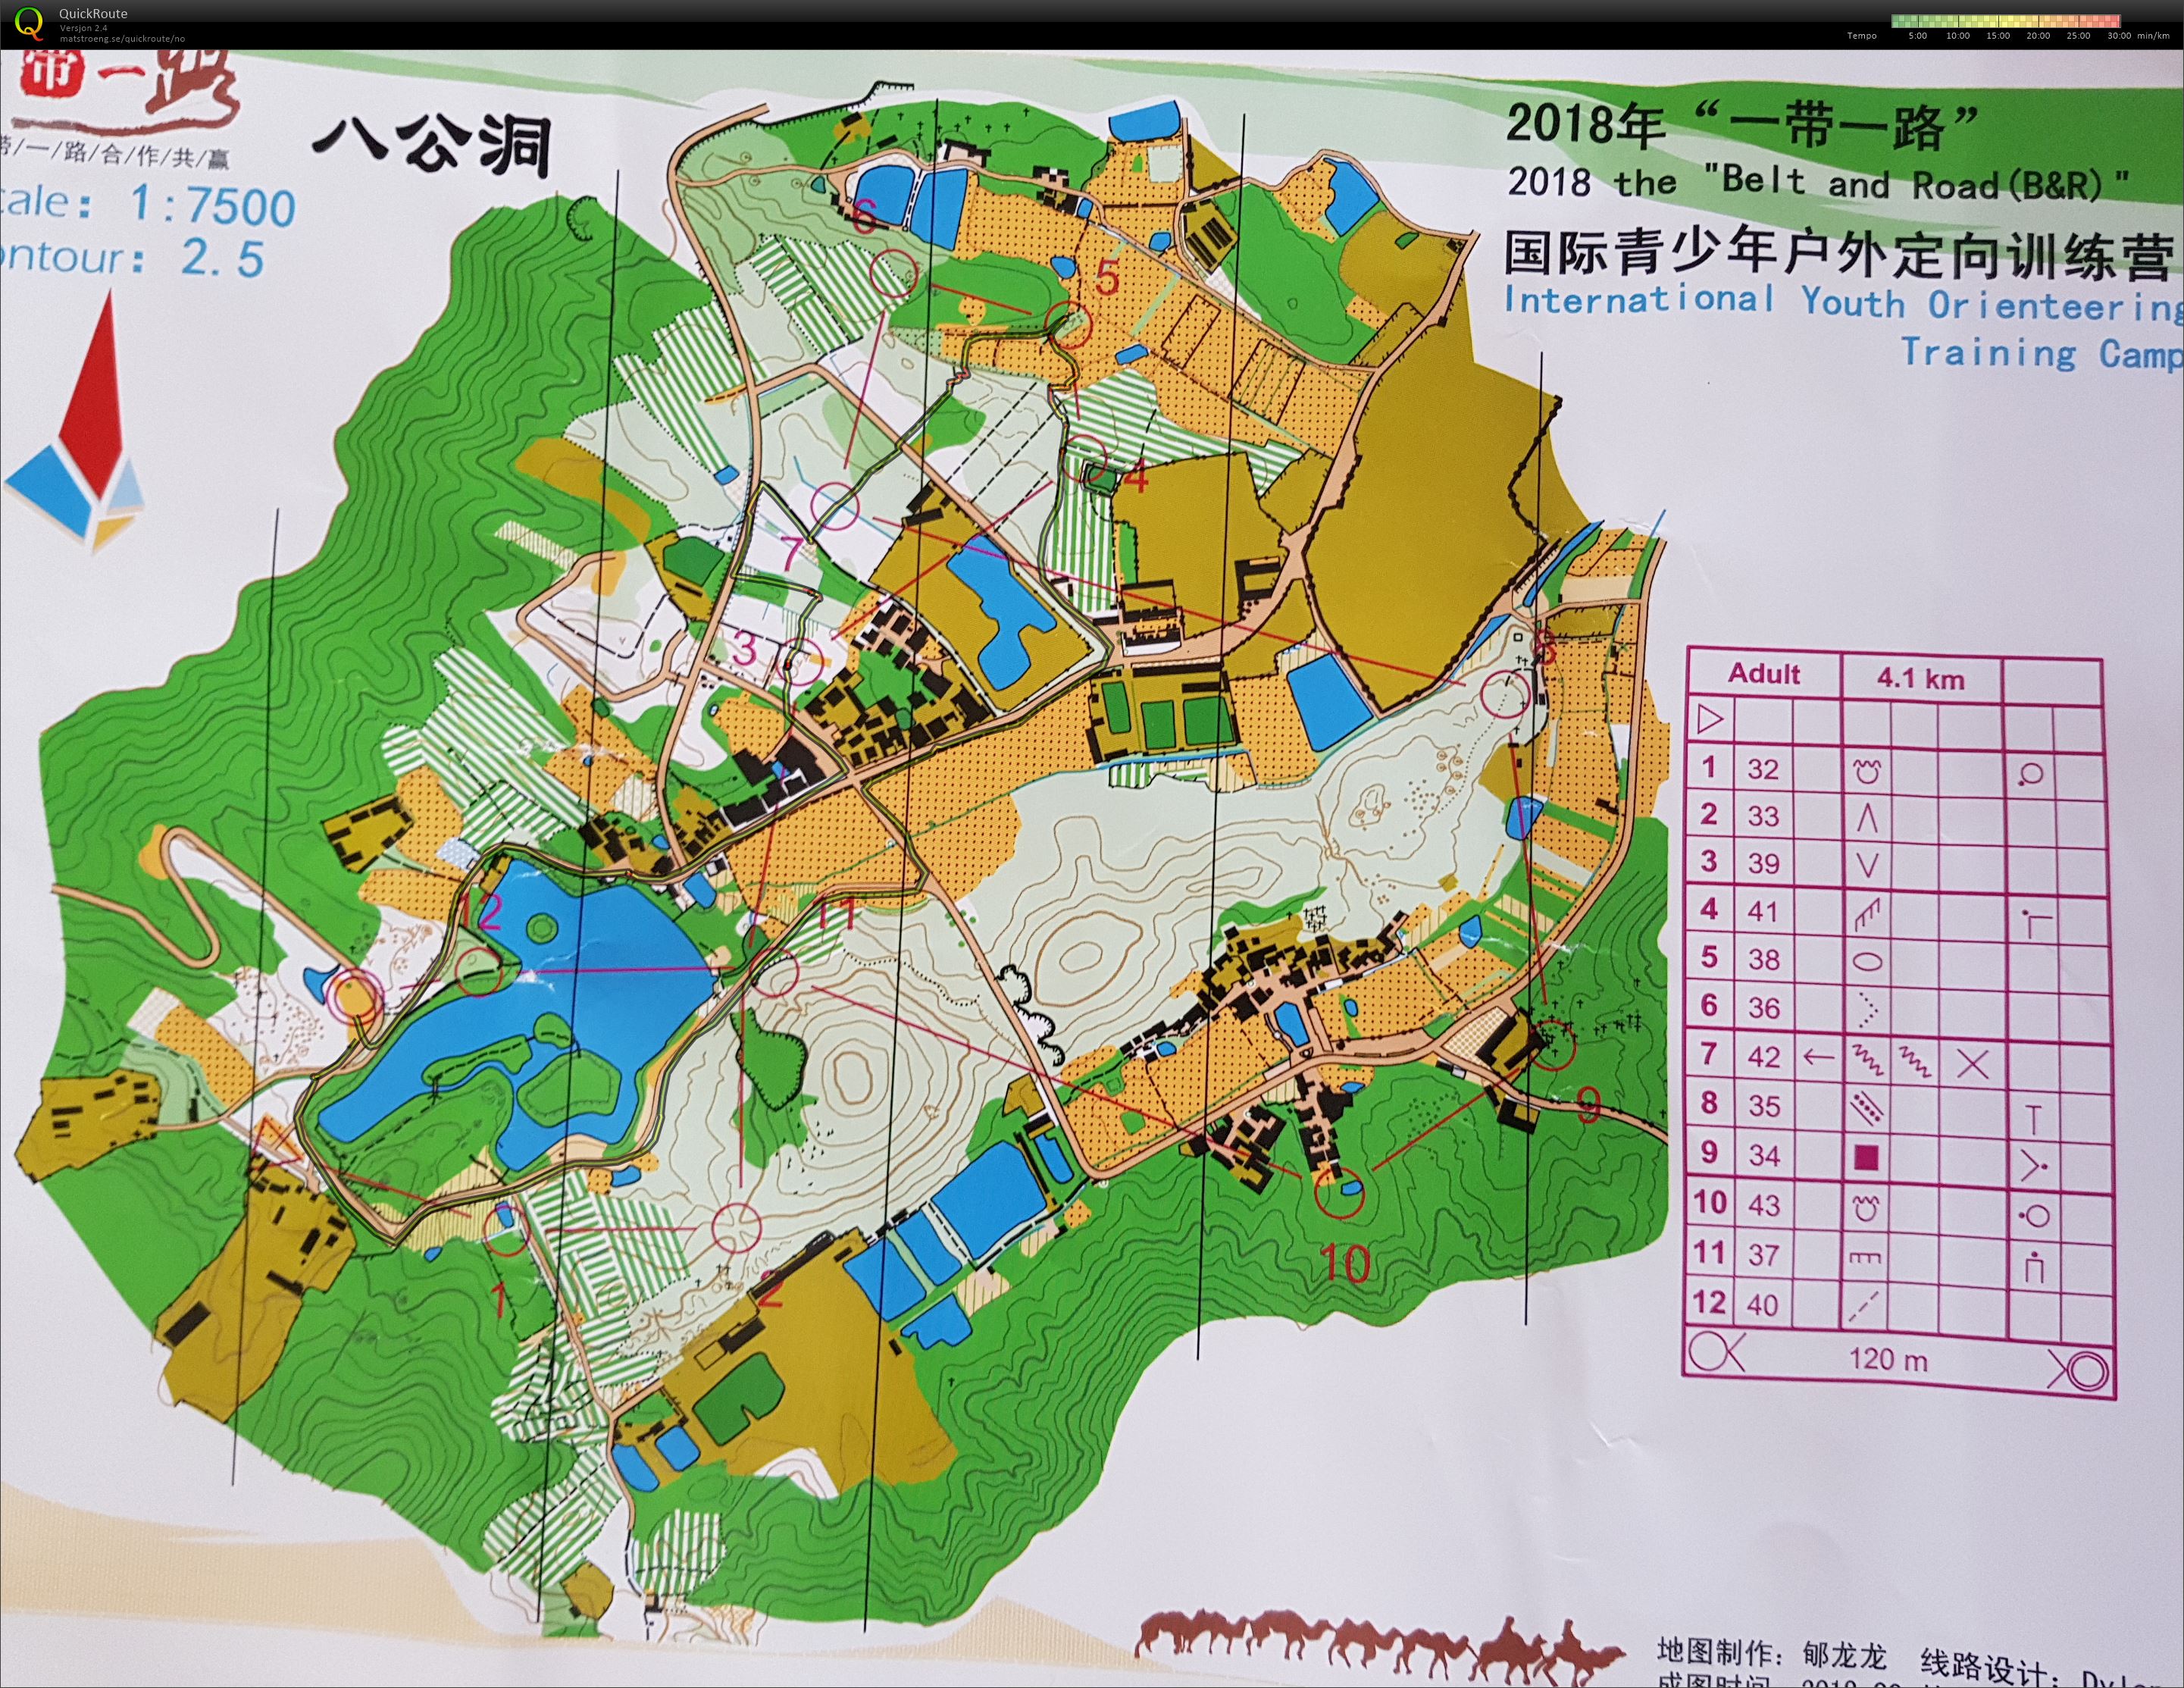 Belt and Road International Youth Orienteering Camp (28.10.2018)